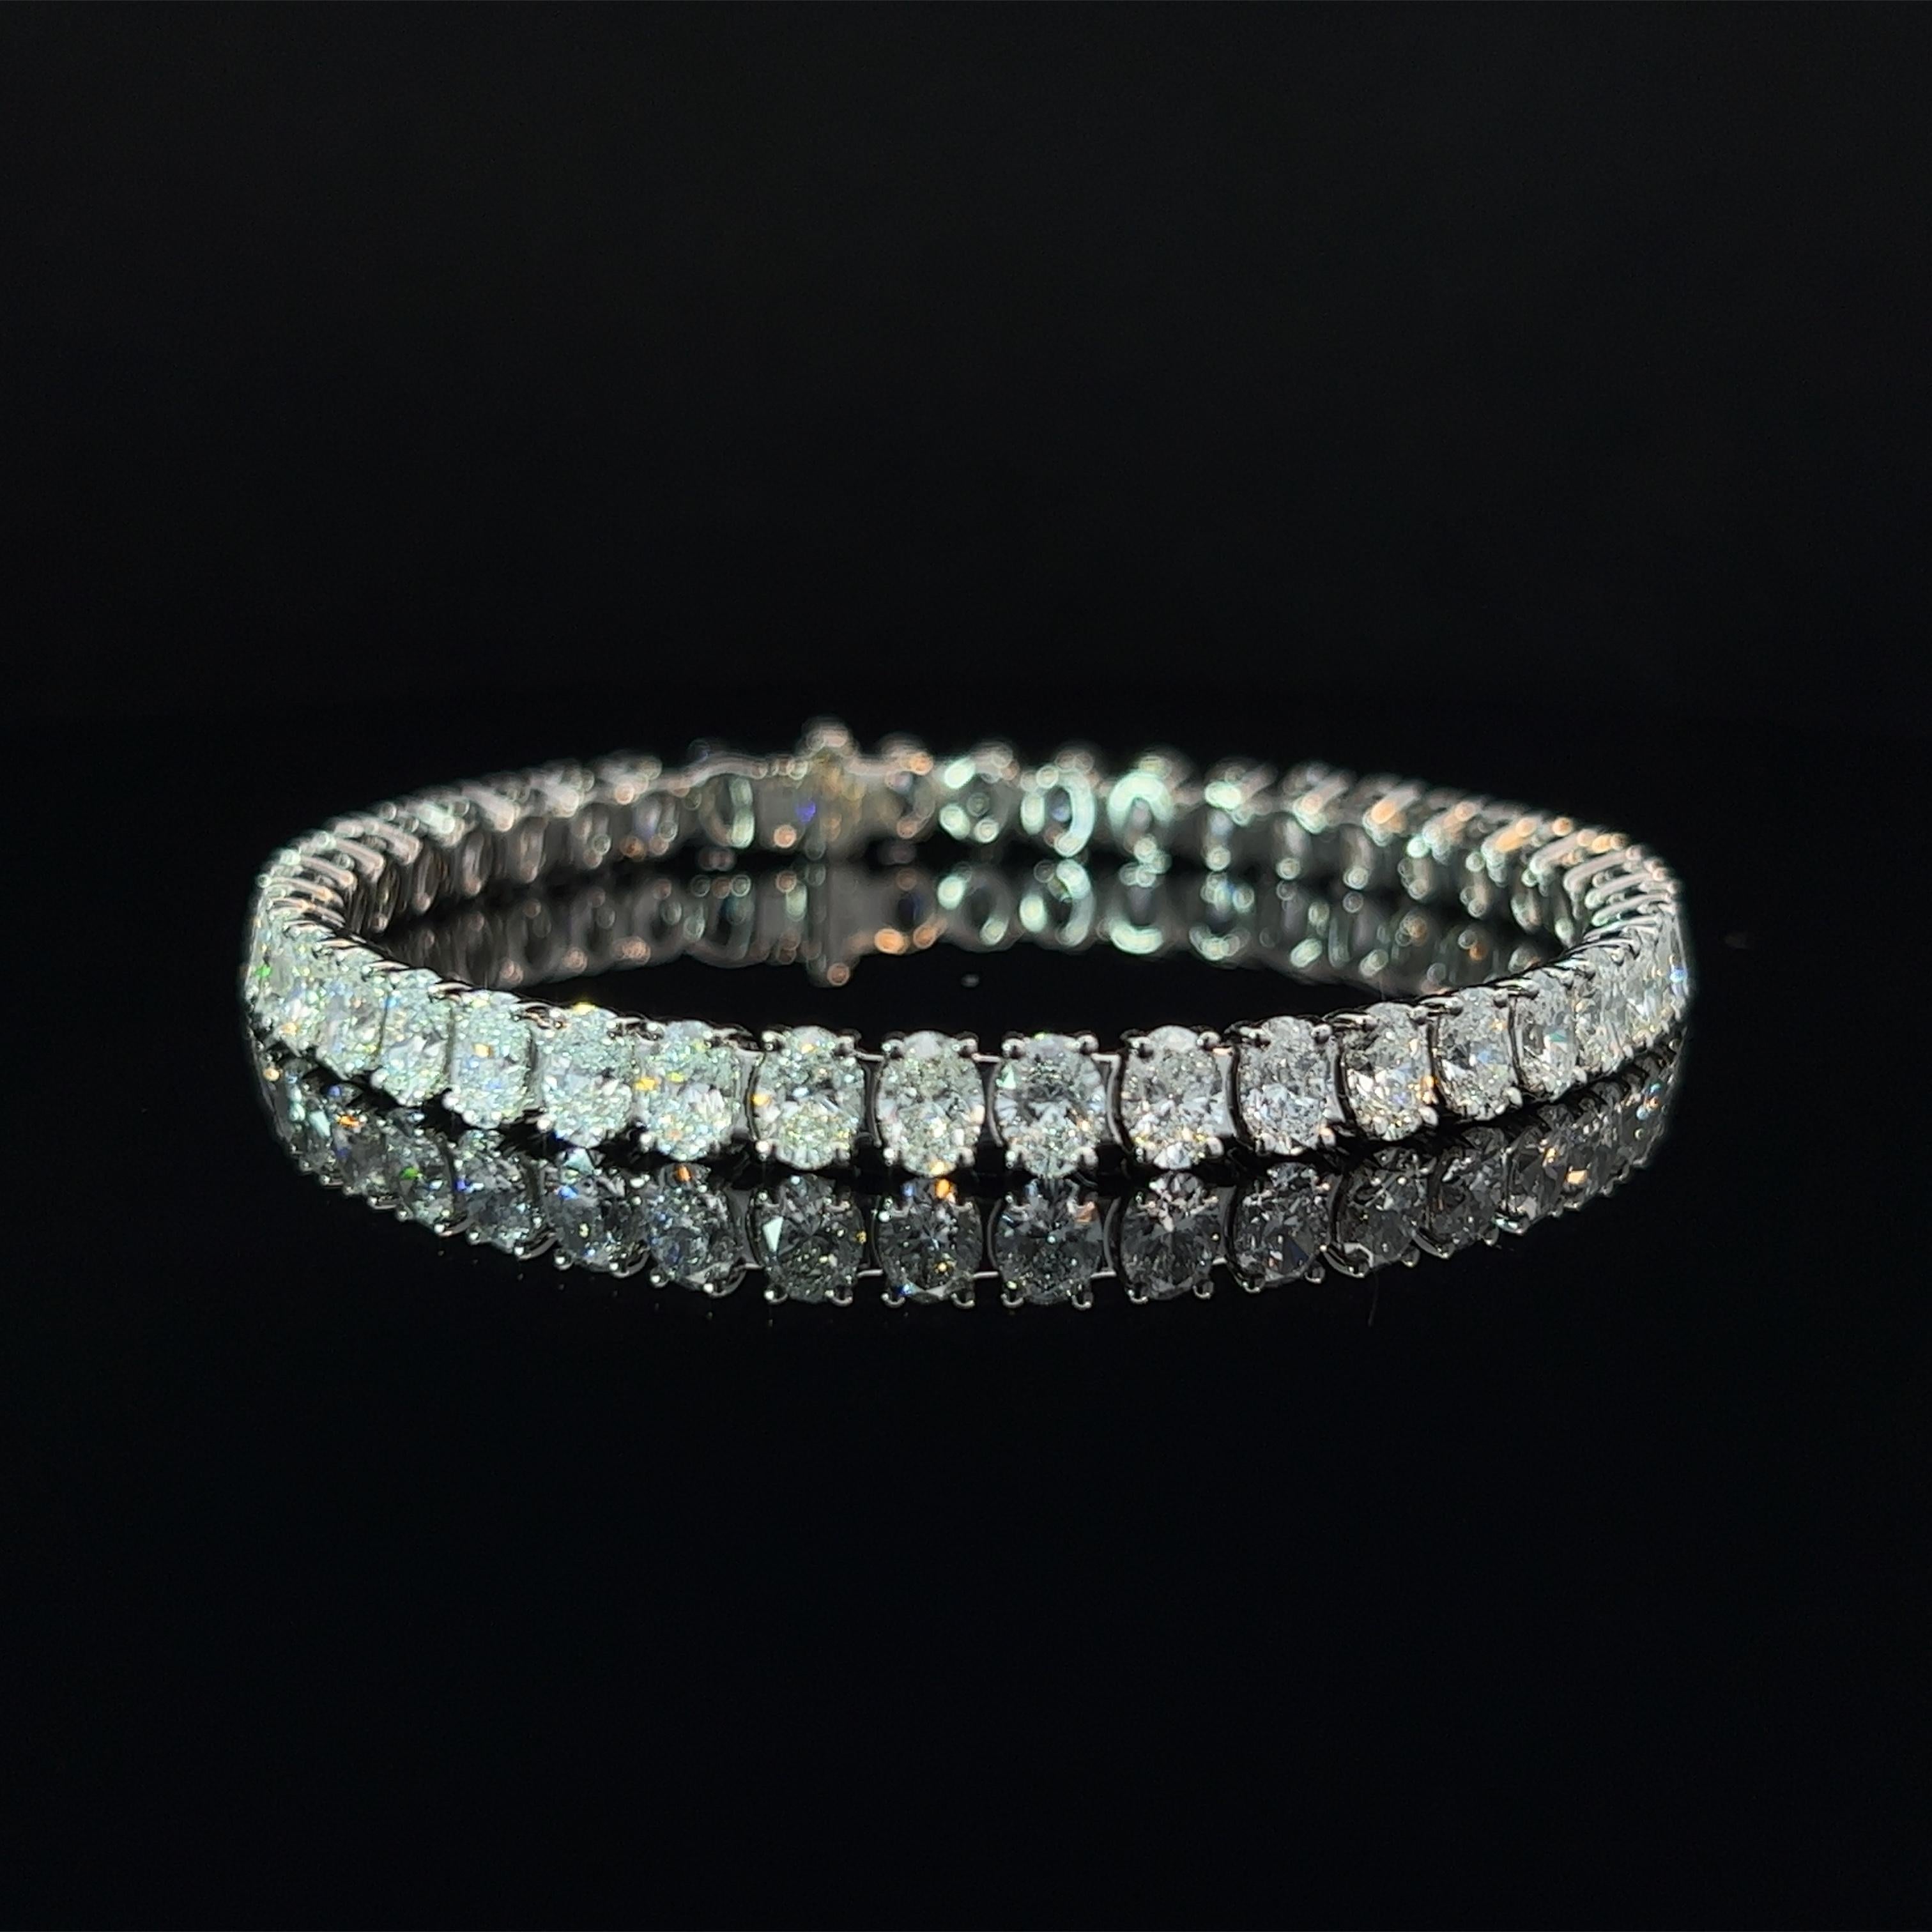 Diamond Shape: Oval Cut 
Total Diamond Weight: 13.1ct
Individual Diamond Weight: .33ct
Color/Clarity: FG VVS  
Metal: 950 Platinum
Metal Weight: 22.64g 

Key Features:

Oval-Cut Diamonds: The centerpiece of this bracelet features a dazzling array of